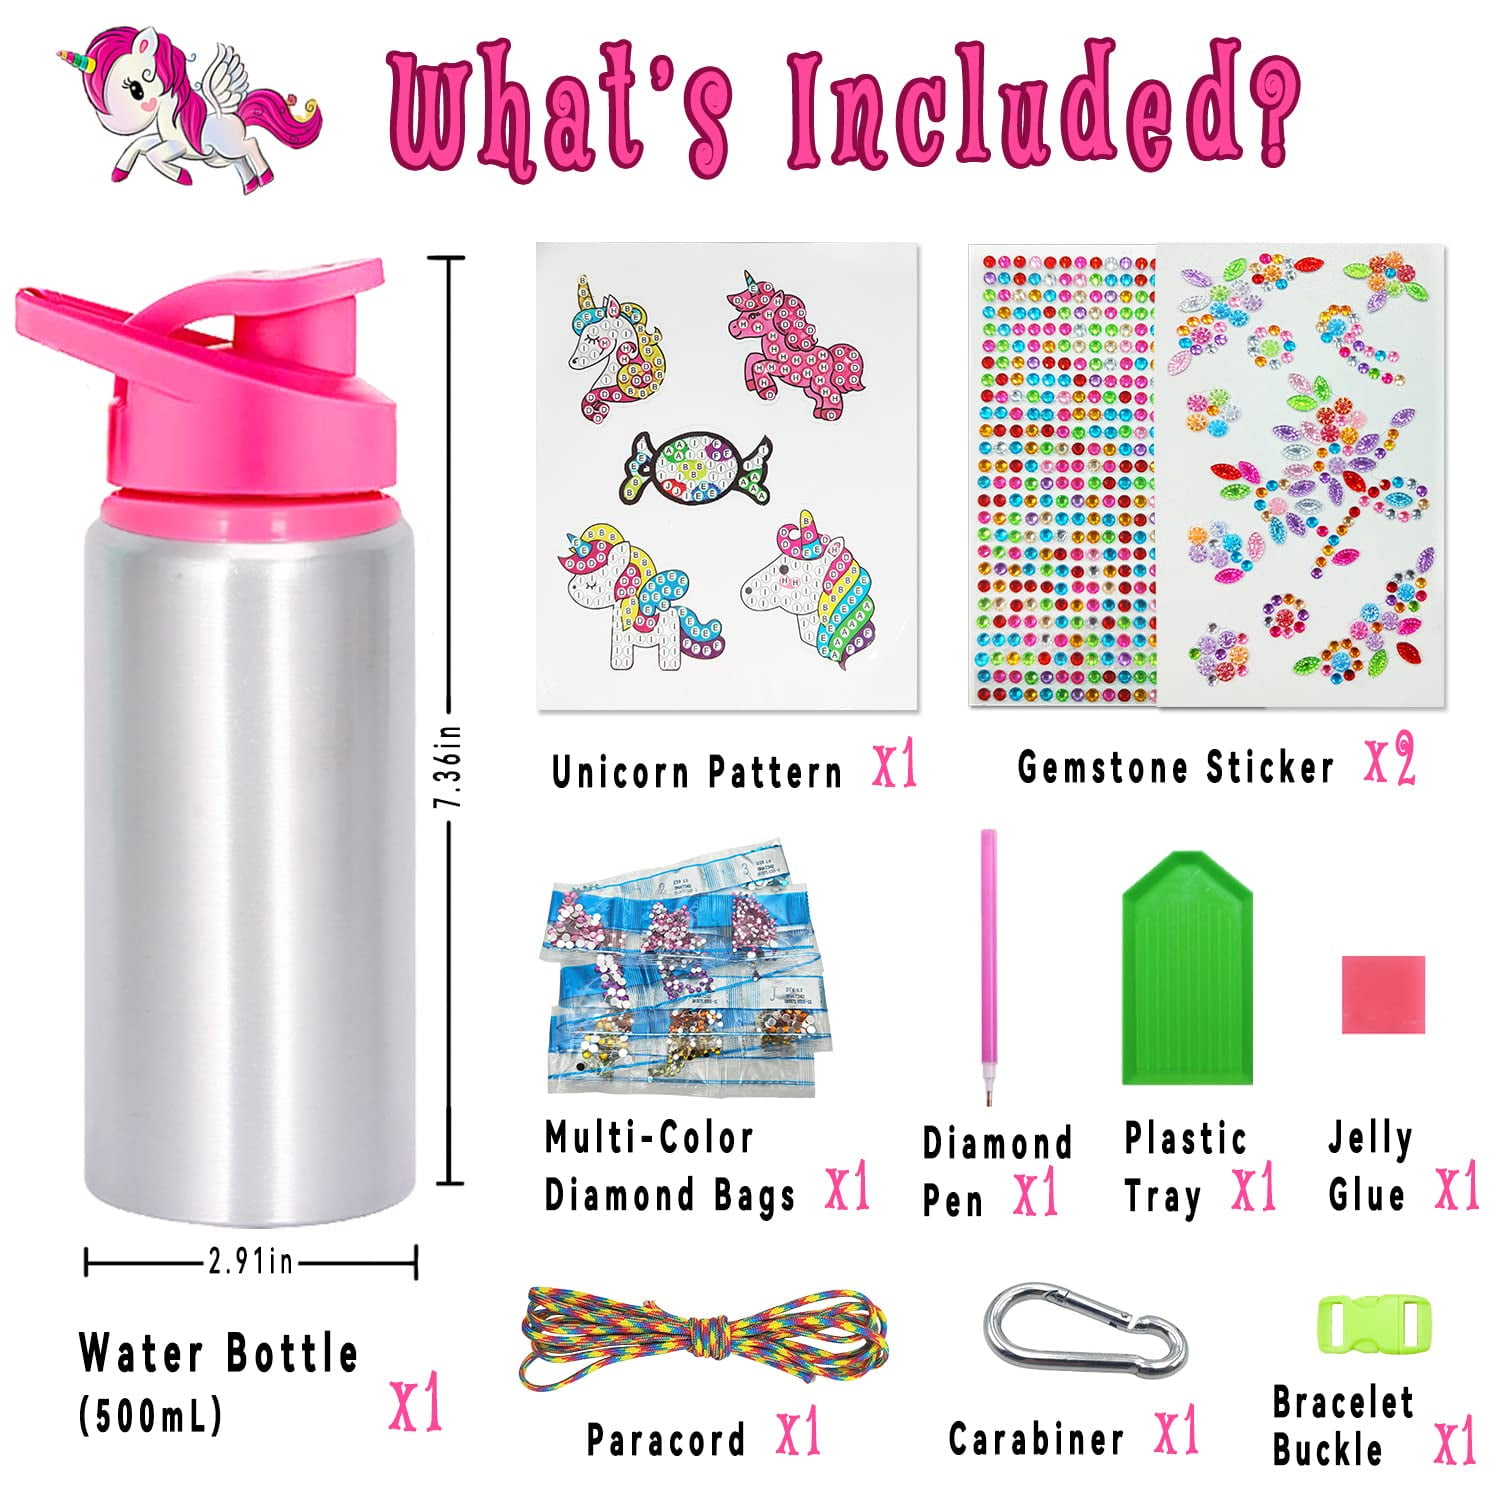  7july Decorate Your Own Water Bottle Kits for Girls Age  4-6-8-10 (Stainless Steel),Mermaid Themed Gem Diamond Painting Crafts,Fun  Arts and Crafts Gifts Toys for Girls Birthday Christmas : Toys & Games